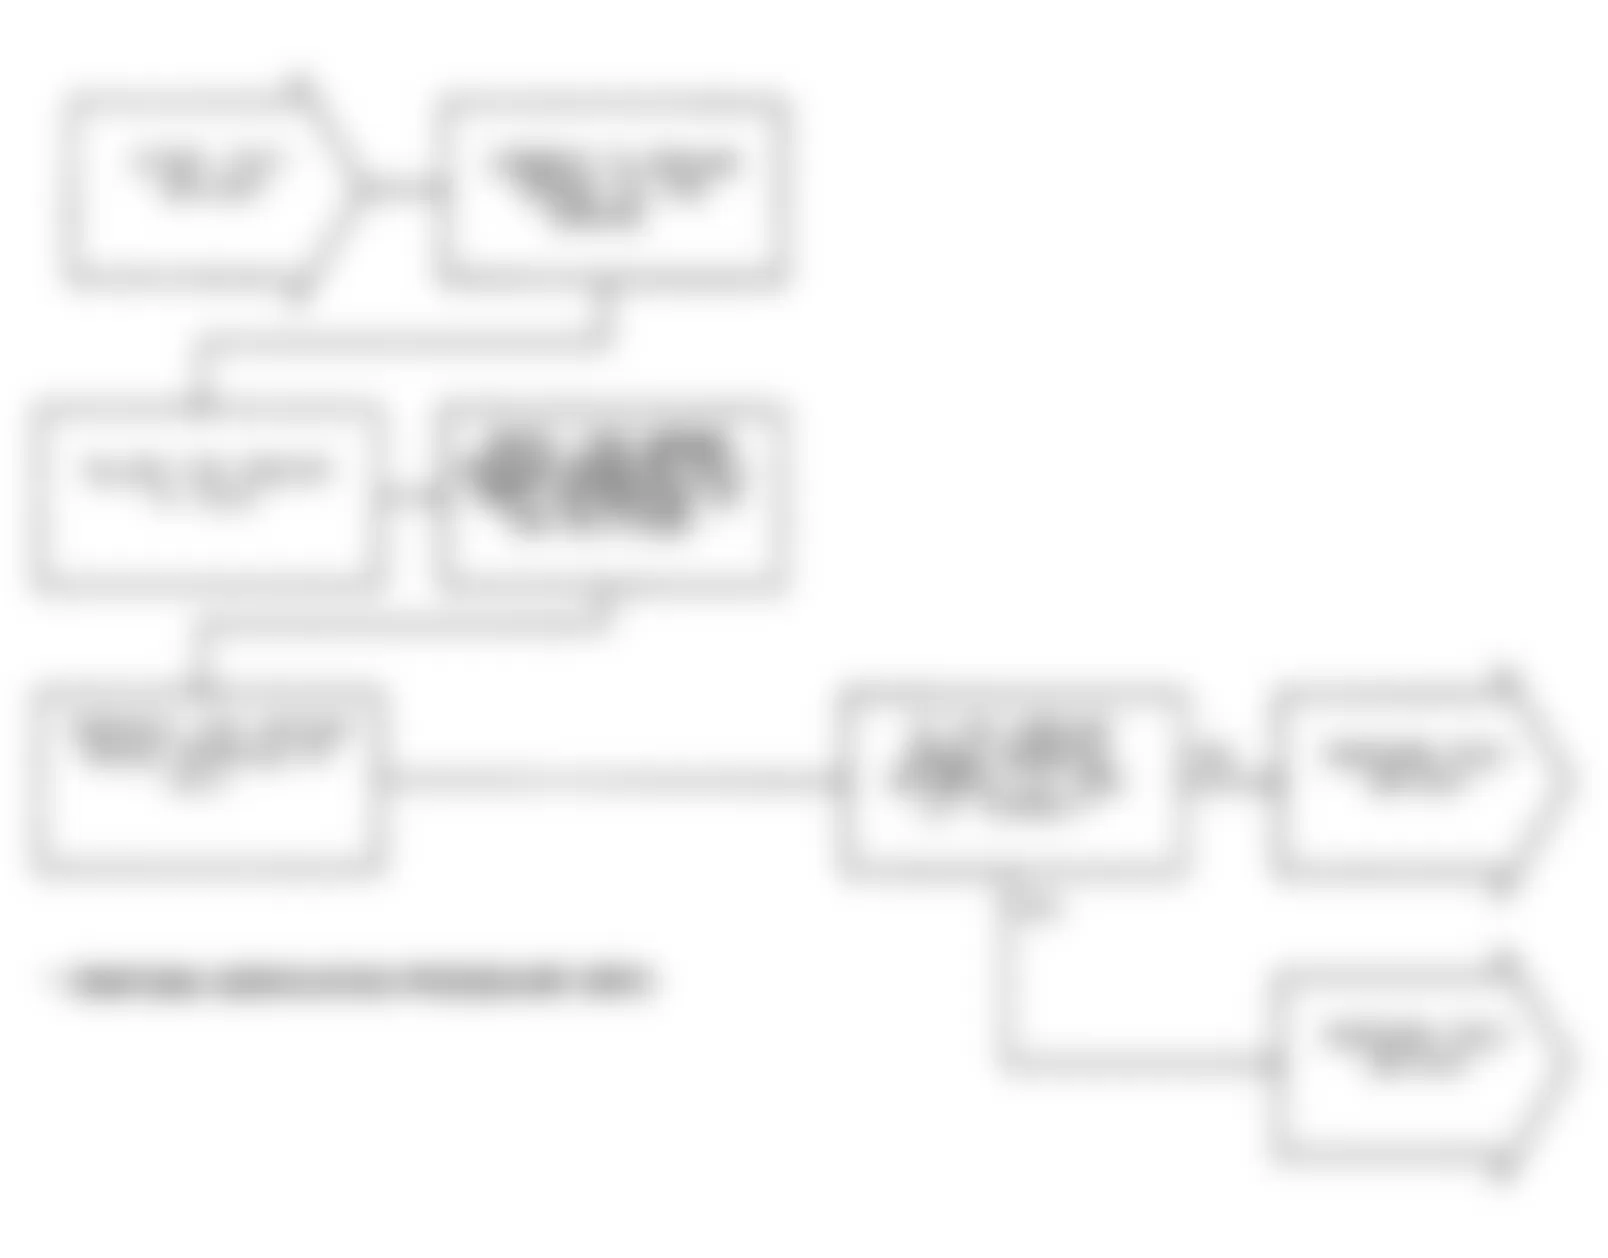 Chrysler Imperial 1991 - Component Locations -  Test DR-42A: Flowchart